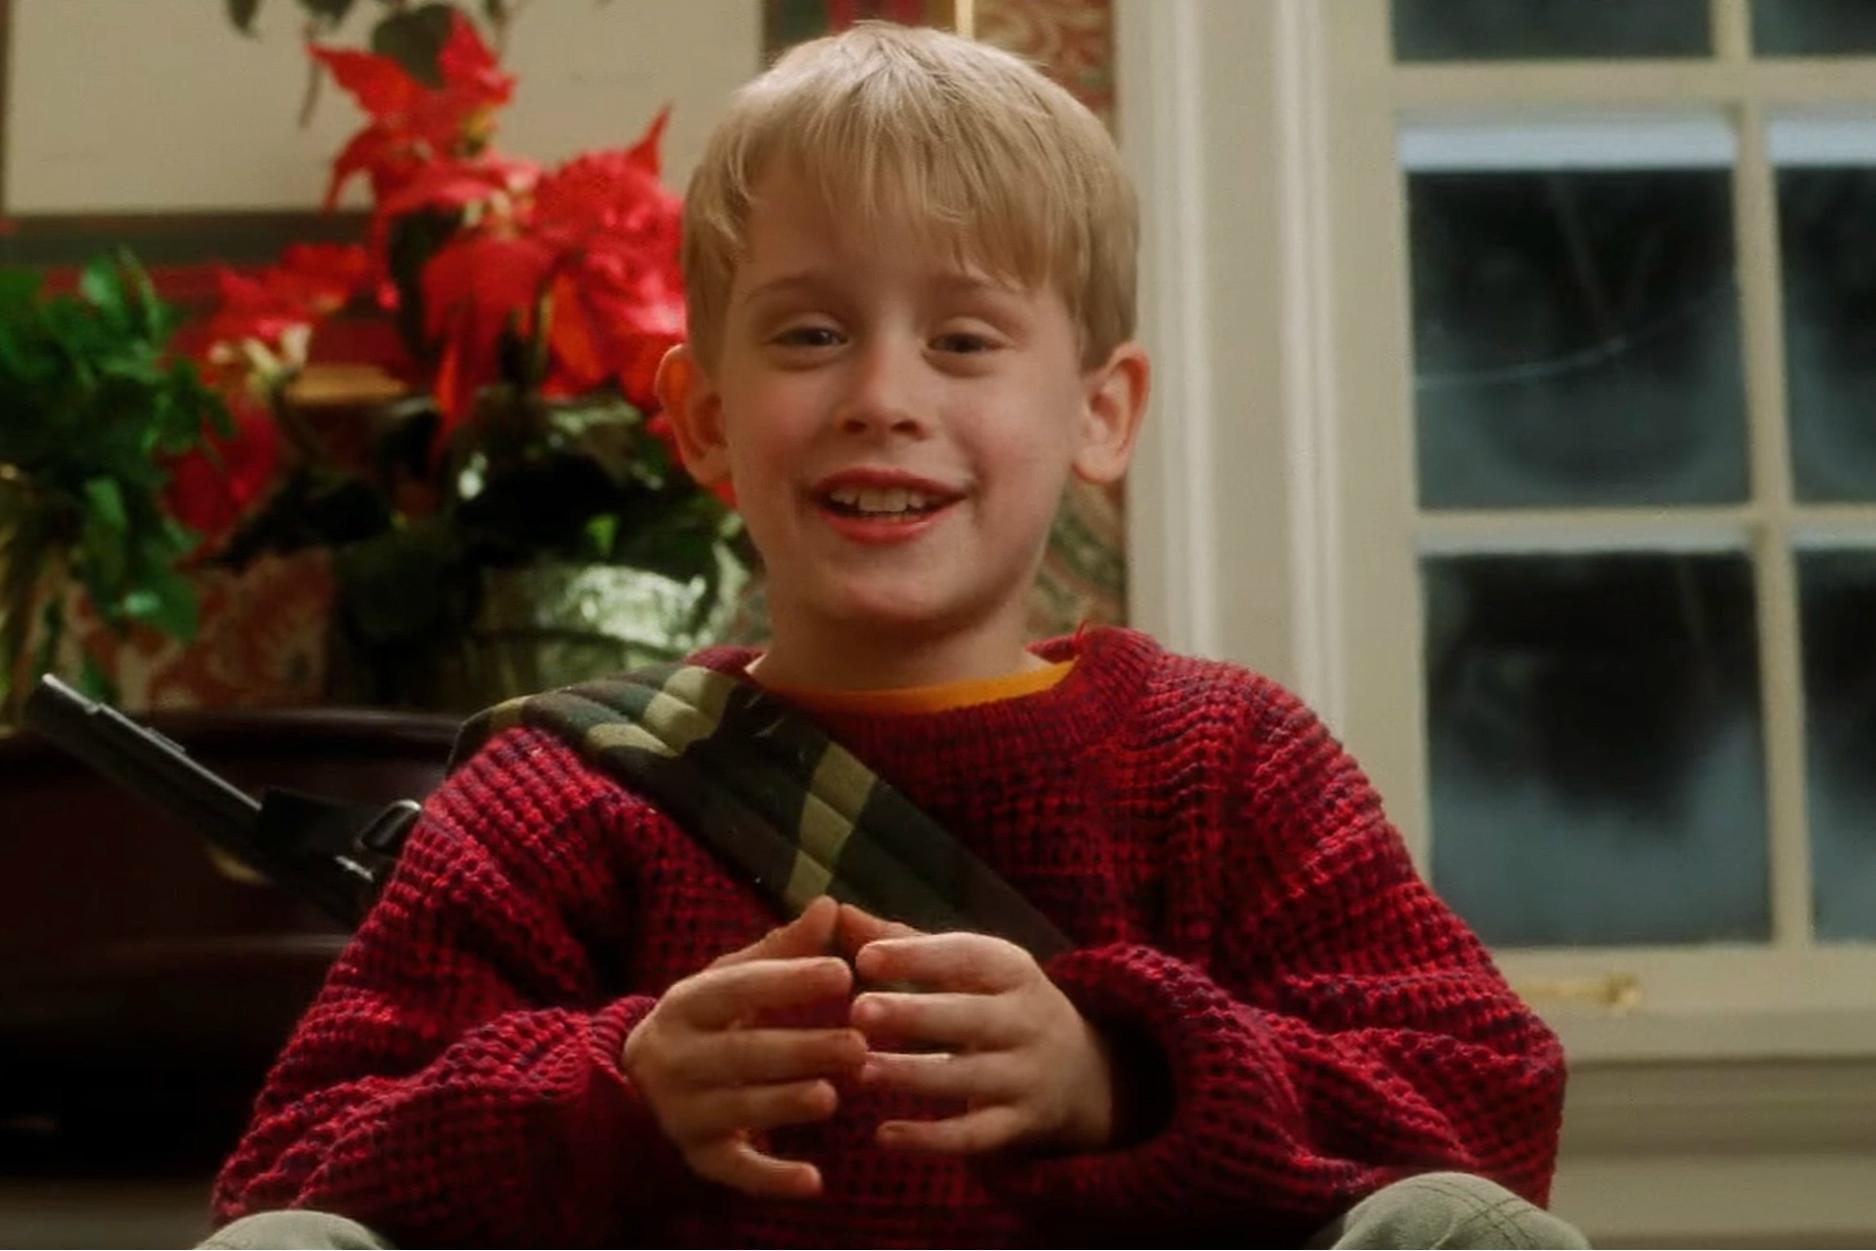 56. Macaulay Culkin was only ten years old when they filmed 'Home Alon...